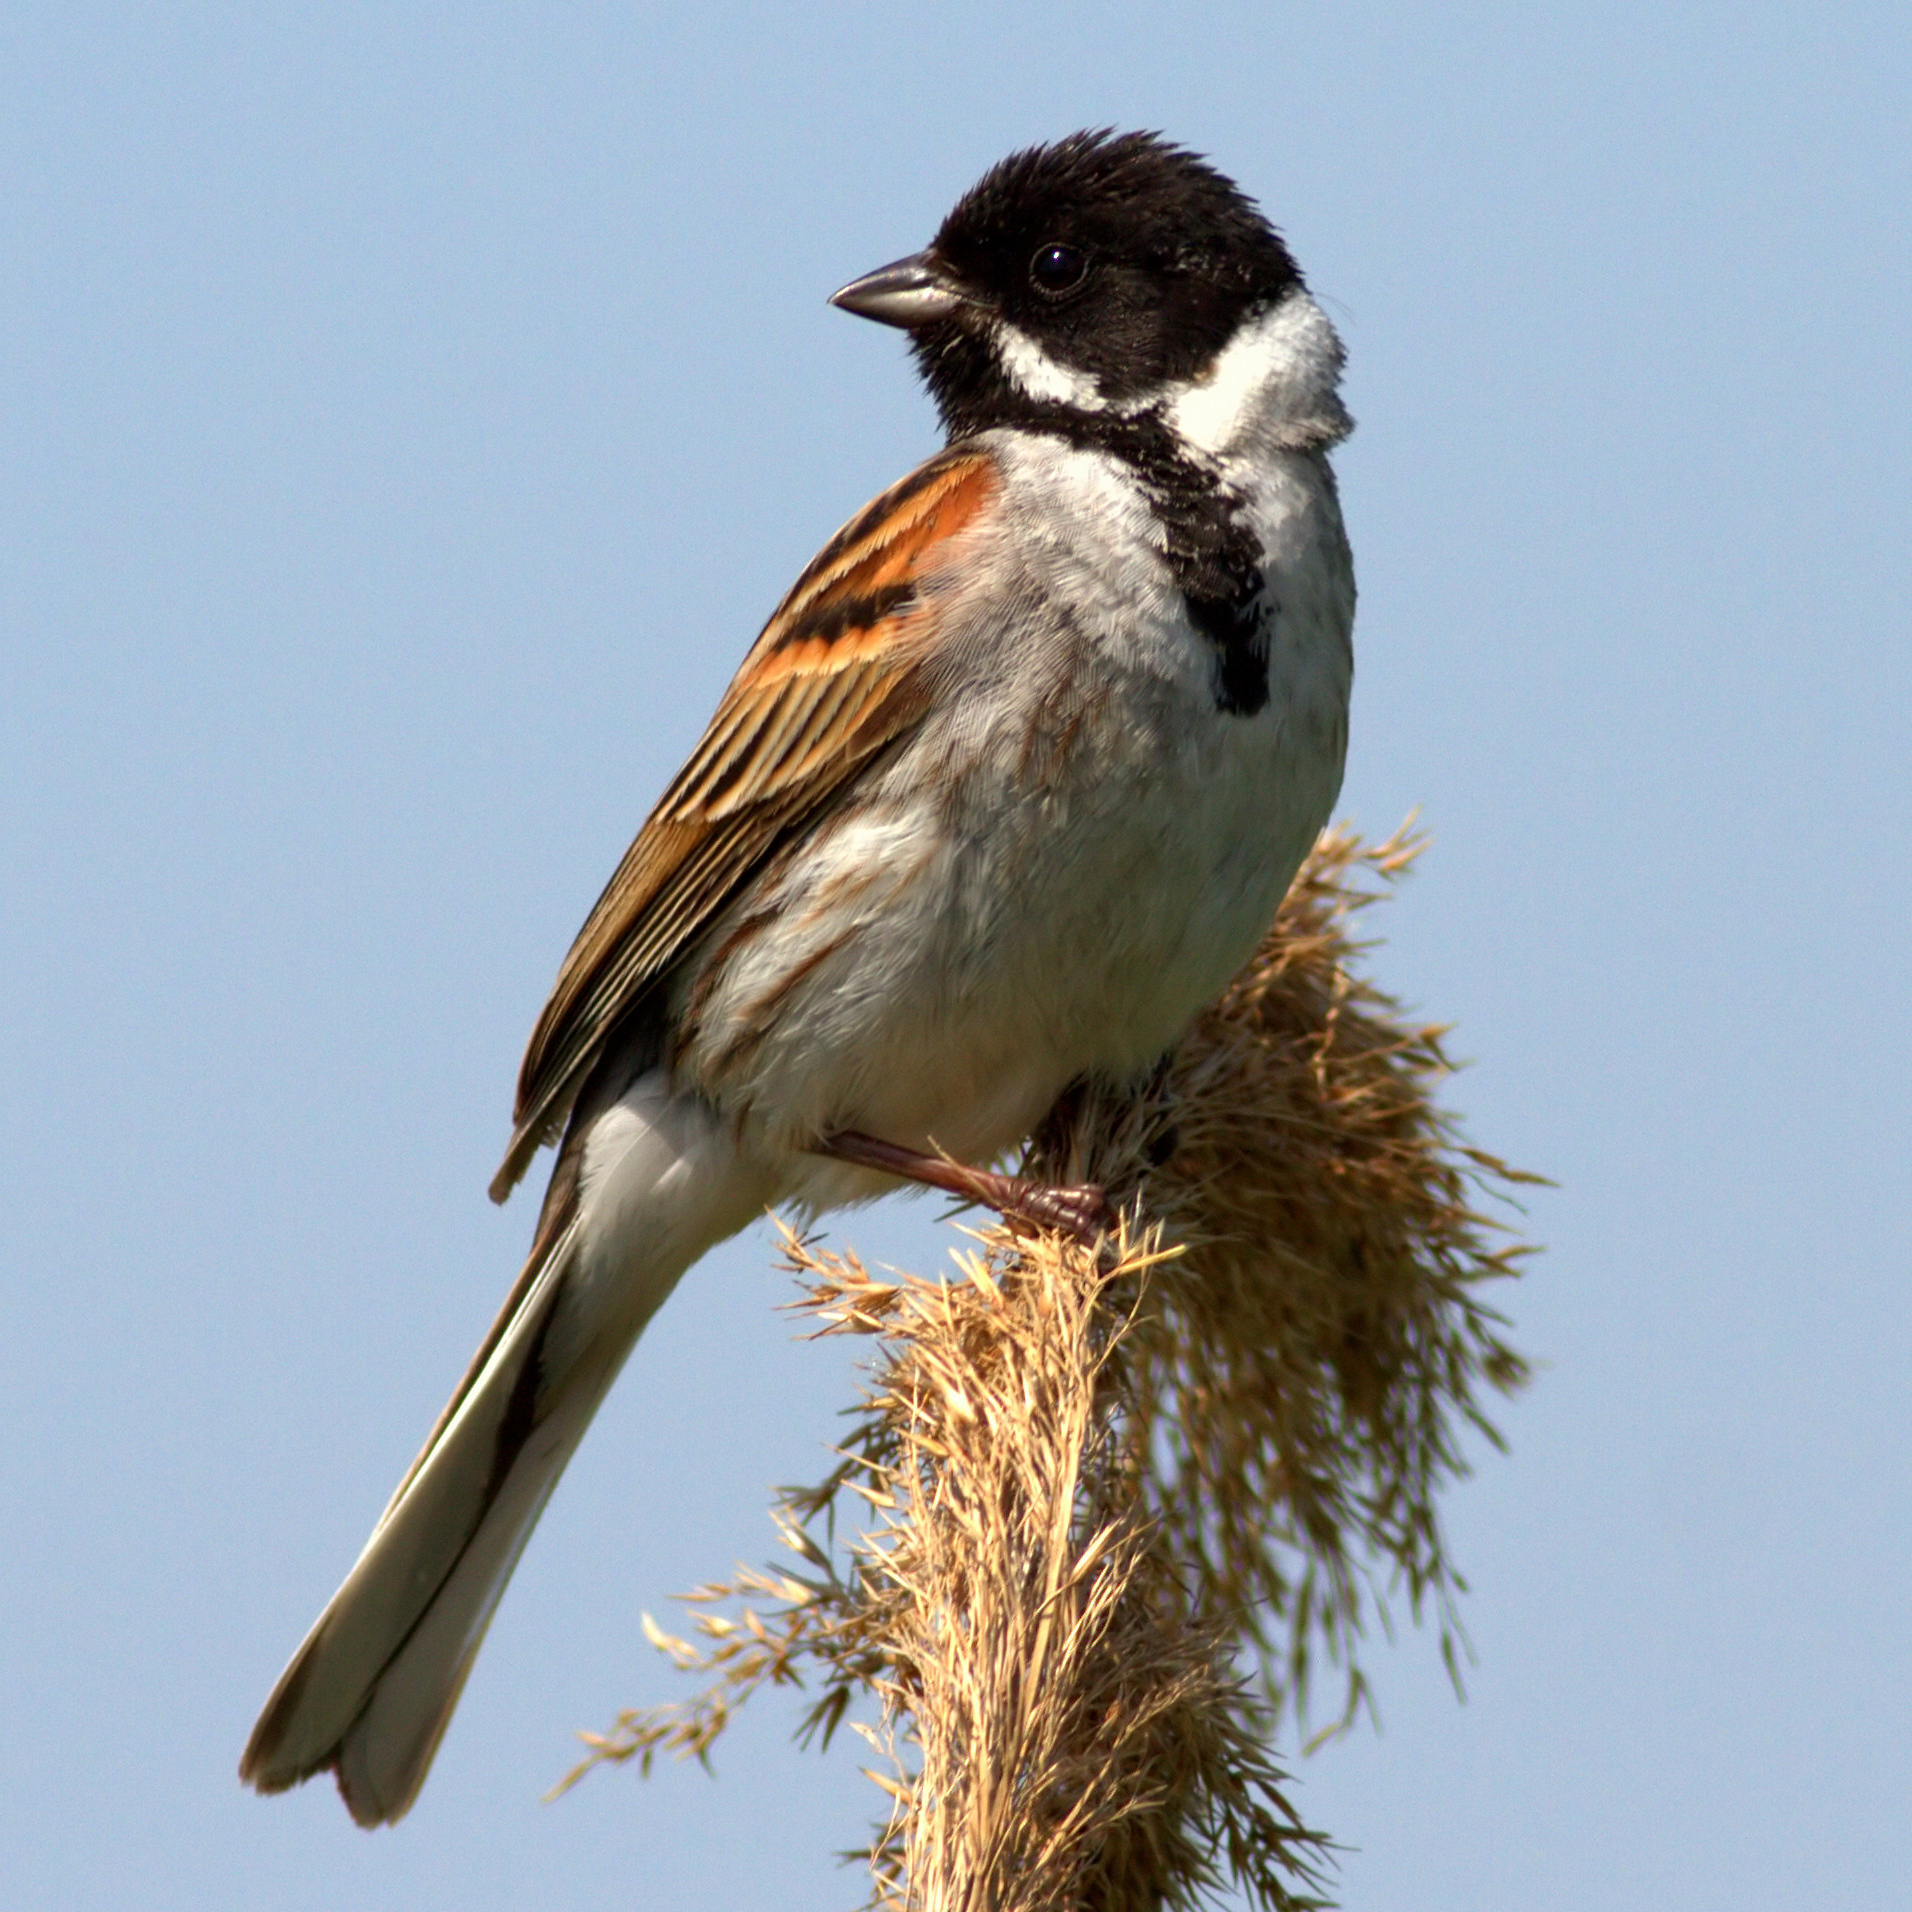 a reed bunting sitting on the top of a reed tassle